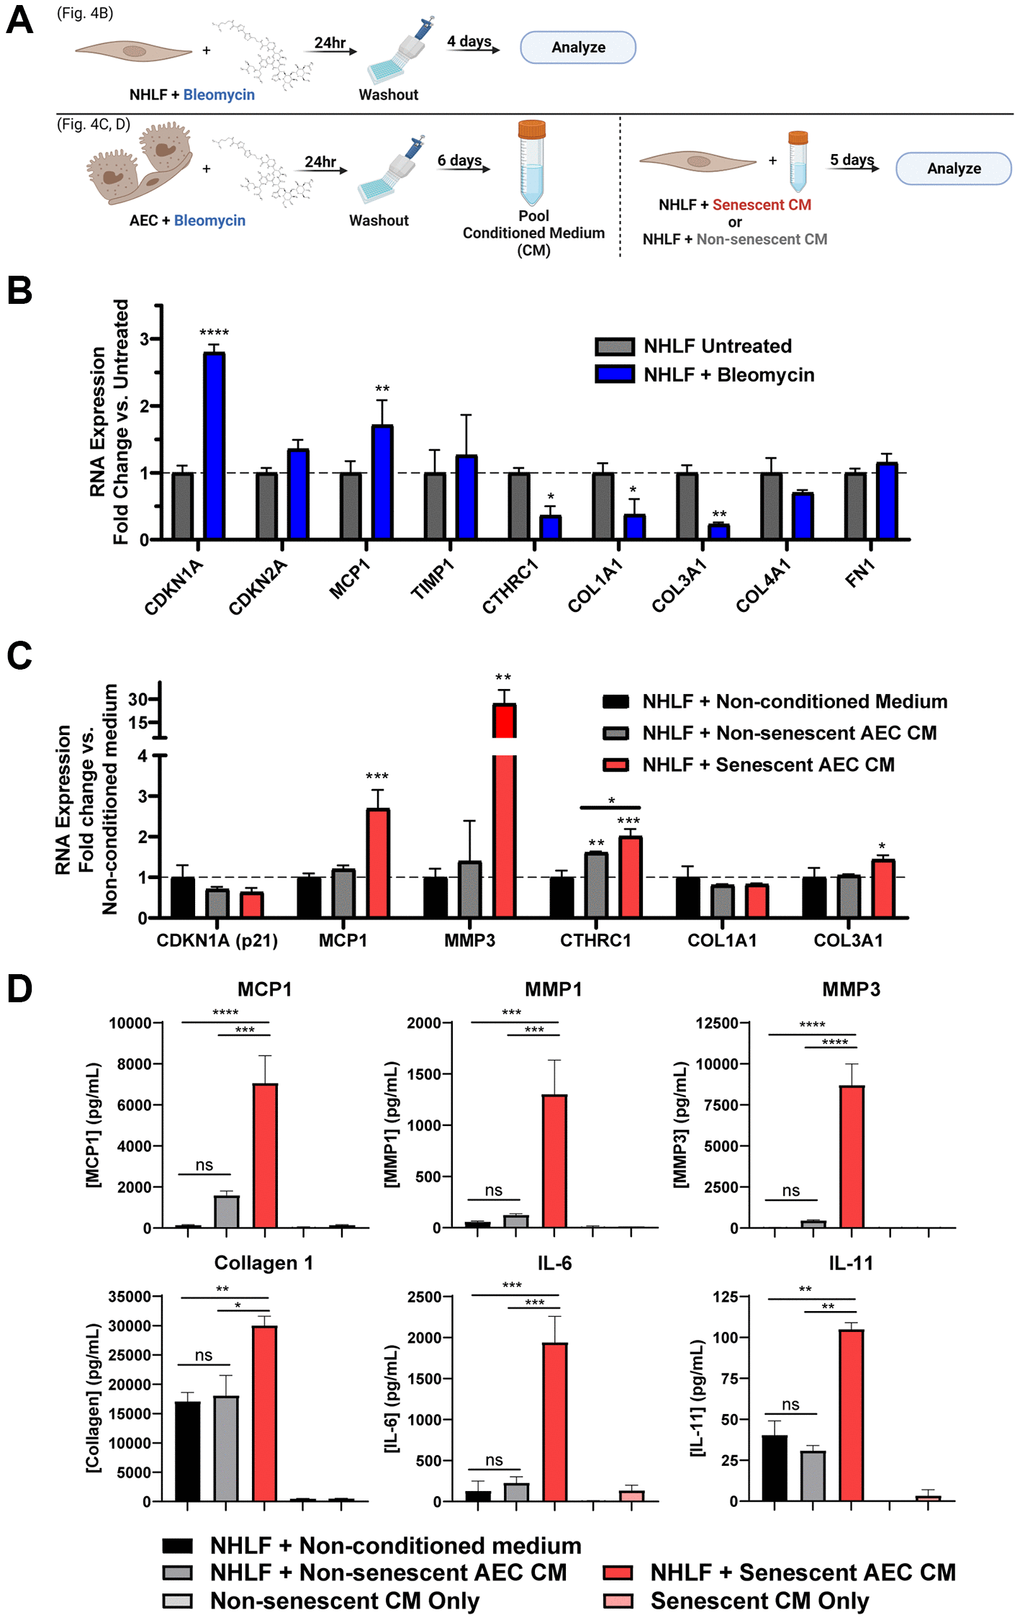 Secreted factors from senescent alveolar epithelial cells potentiate pro-fibrotic gene expression and protein secretion more robustly than direct damage of fibroblasts. (A) Schematic summarizing the experimental protocol of direct damage of NHLFs with bleomycin or indirect treatment of NHLFs by transferring conditioned medium from bleomycin-treated AECs. Image created with https://www.biorender.com/. (B) Treated or untreated NHLF cells were lysed, and qPCR gene expression analysis was performed. Expression of senescence and fibrosis-related matrix and secreted factor genes was assessed, and data were normalized to β2m housekeeper expression using the 2−ΔΔCt method. (C) Senescent or non-senescent AEC conditioned medium or blank AEC medium was diluted 1:3 in fibroblast medium and incubated on NHLFs for 5 days. Cells were lysed for gene expression analysis of senescence and fibrosis-related genes. (D) Supernatants were collected from the treatments described in C and assayed for fibrosis-related secreted proteins by MSD kits. Data are representative of three independent experiments accounting for 3 biological donors of AECs and 2 donors of NHLFs. Statistical analysis was performed using a two-way ANOVA and a Dunnett’s Multiple Comparisons post-test vs. control conditions in GraphPad Prism: *p **p ***p ****p n = 2 technical replicates.